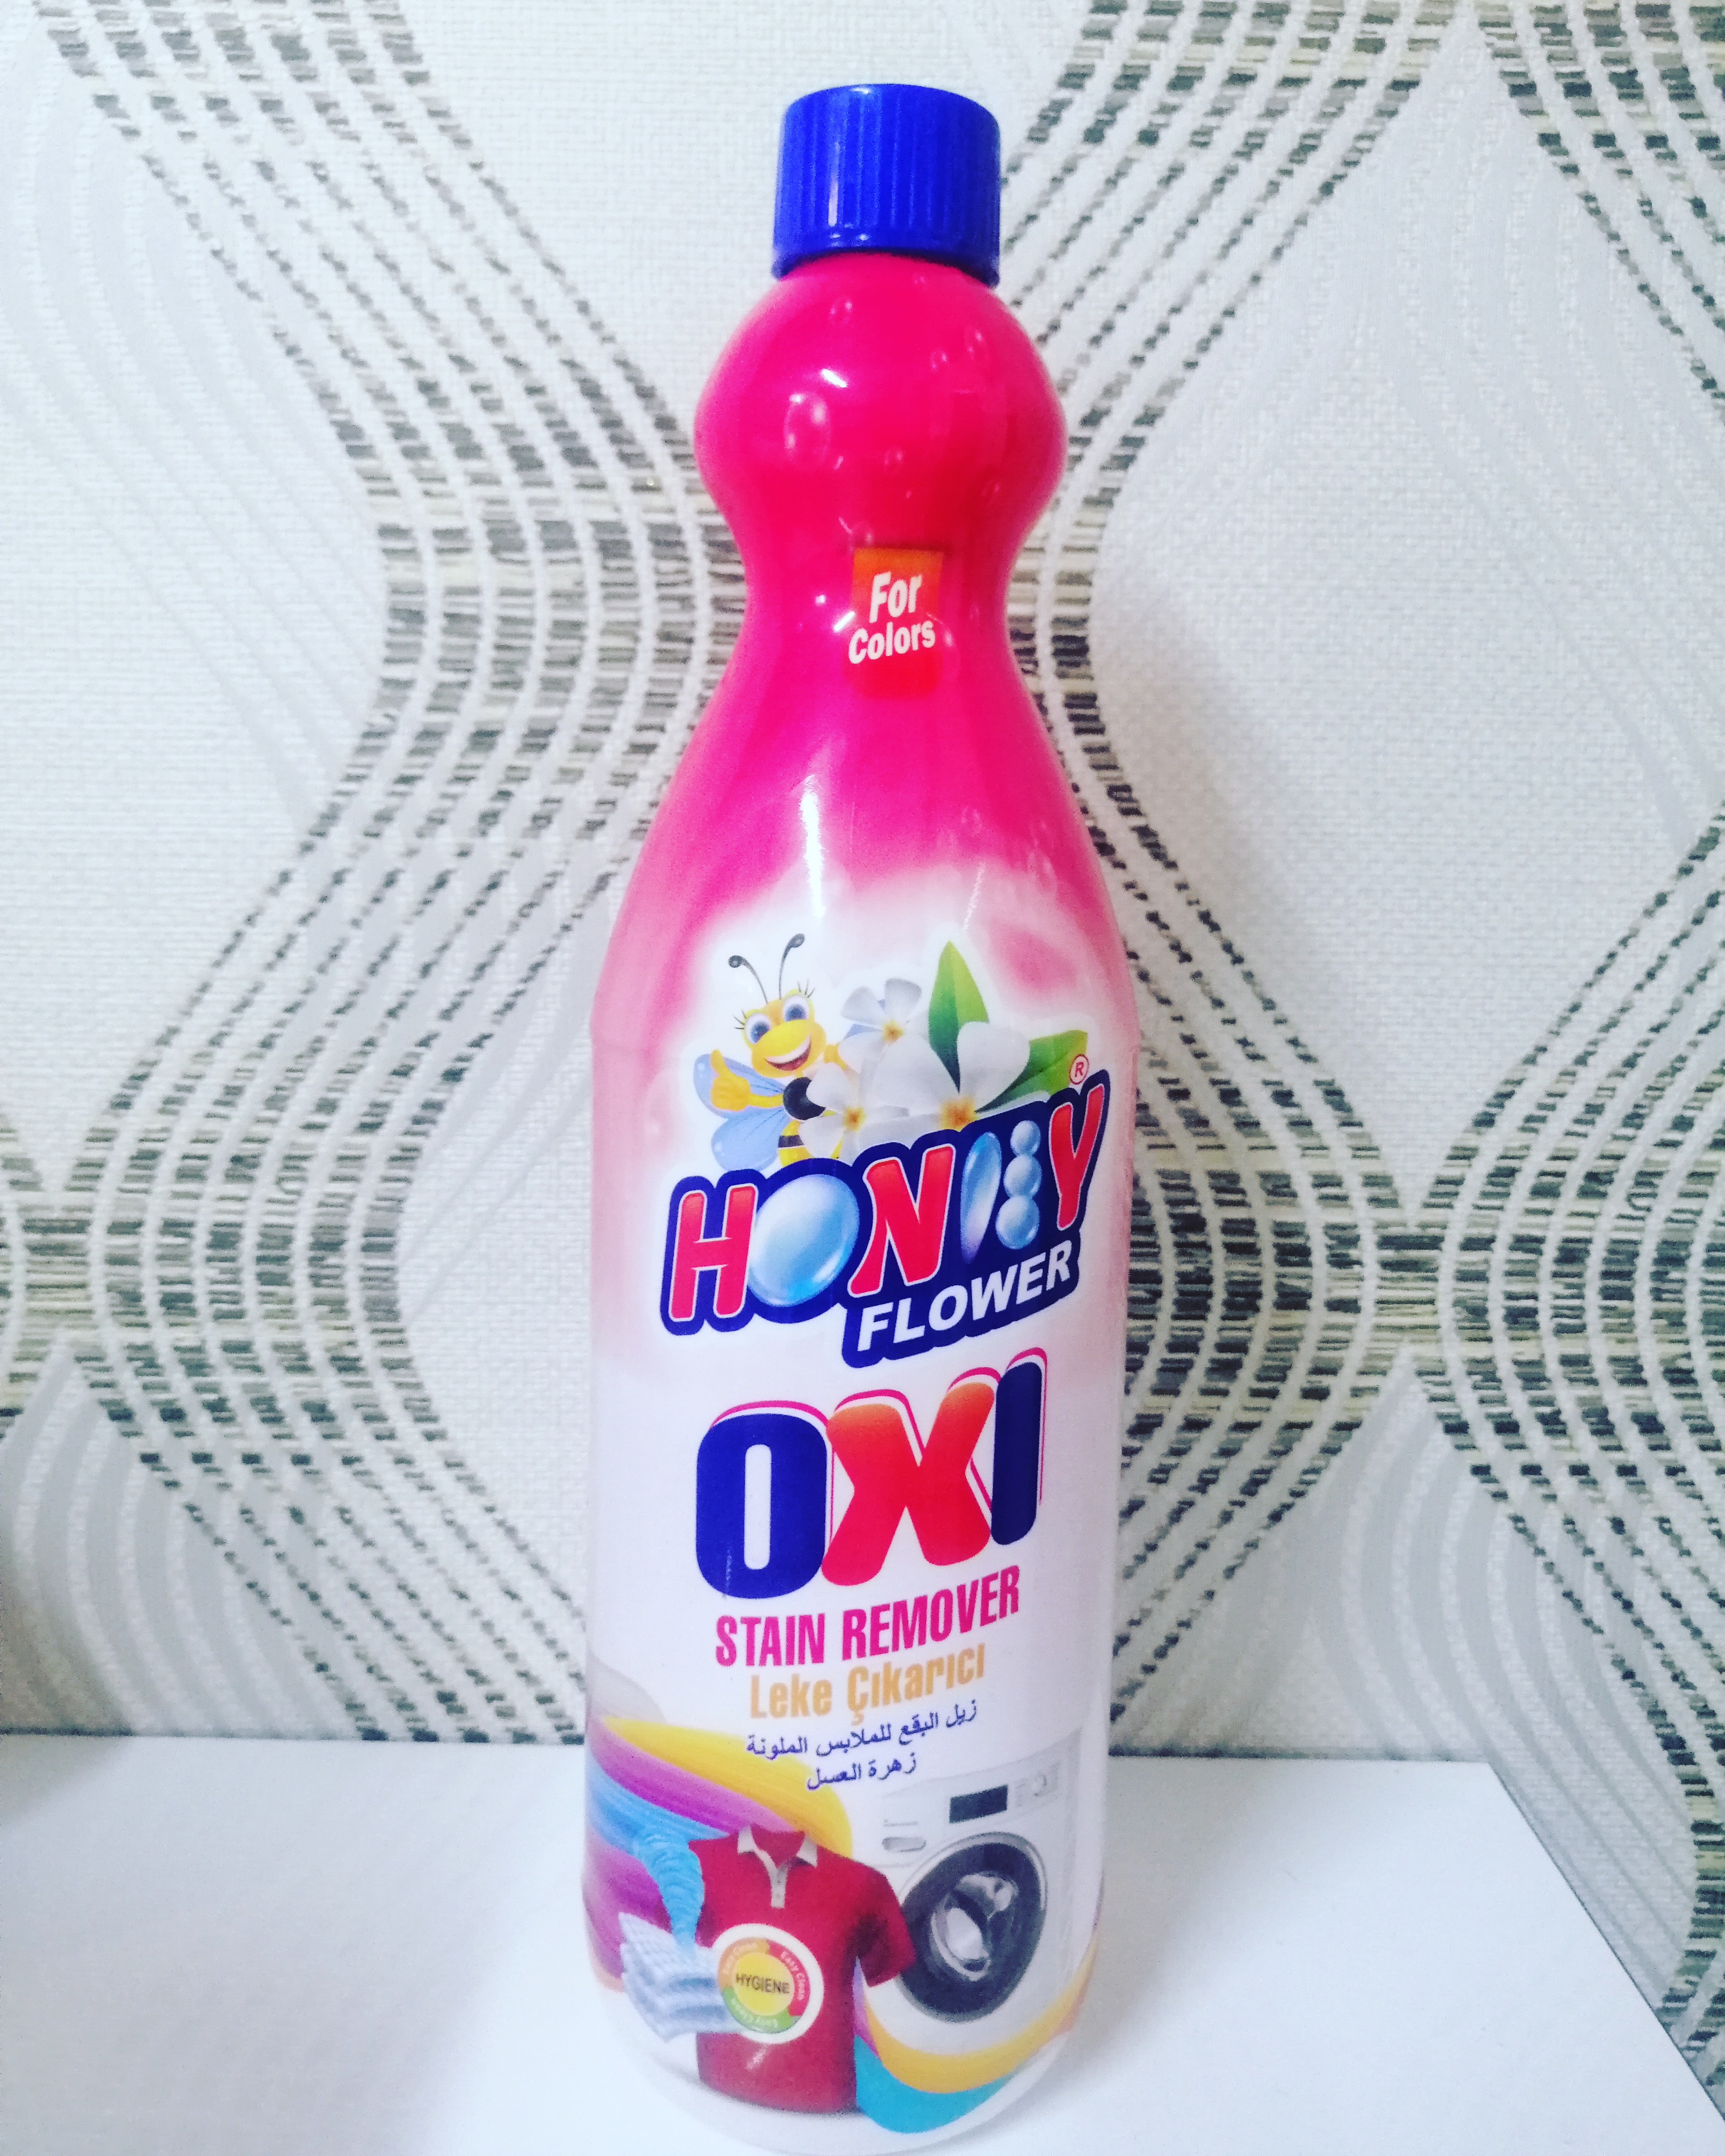 Honey flower oxi stain remover 